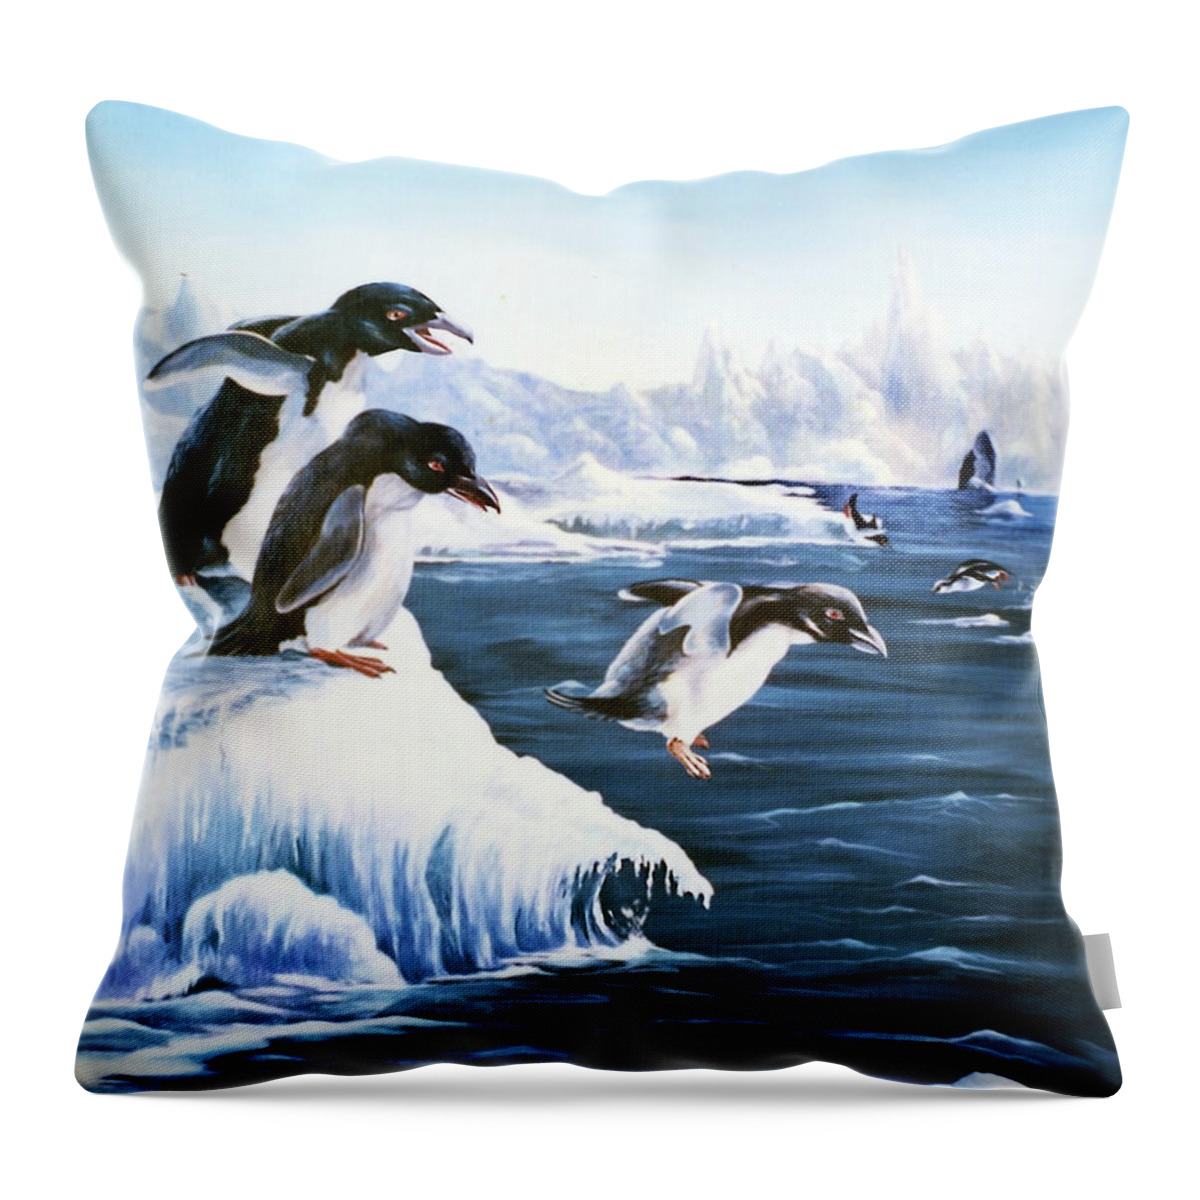 Antarctica Throw Pillow featuring the painting First Leap by Anthony DiNicola